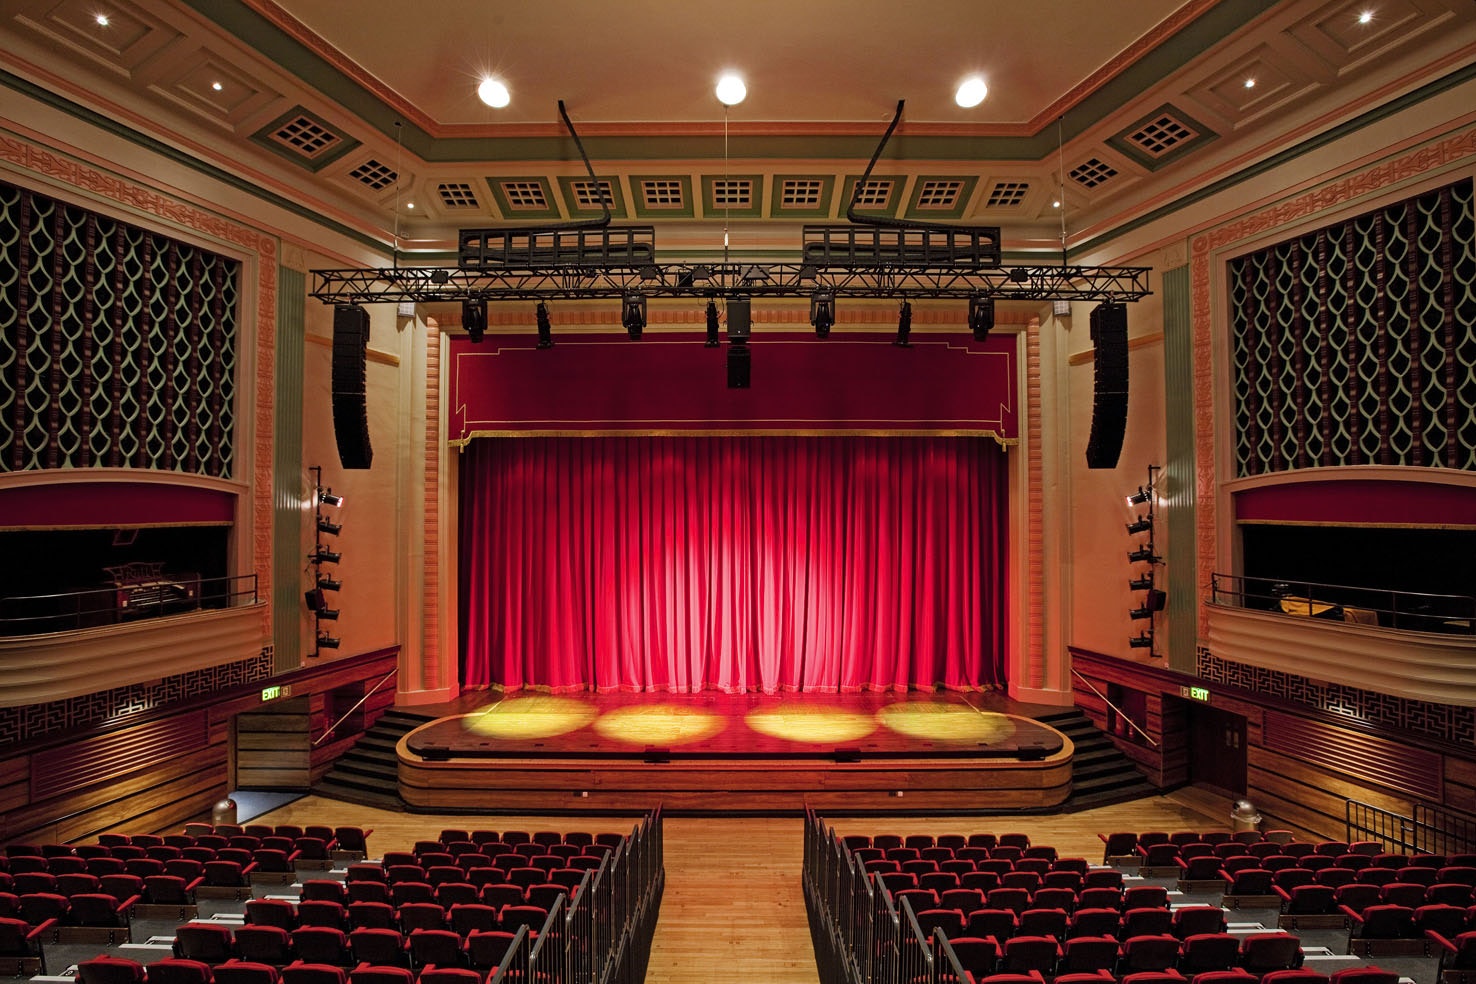 The People's Palace - Queen Mary Venues - The Great Hall Theatre image 6